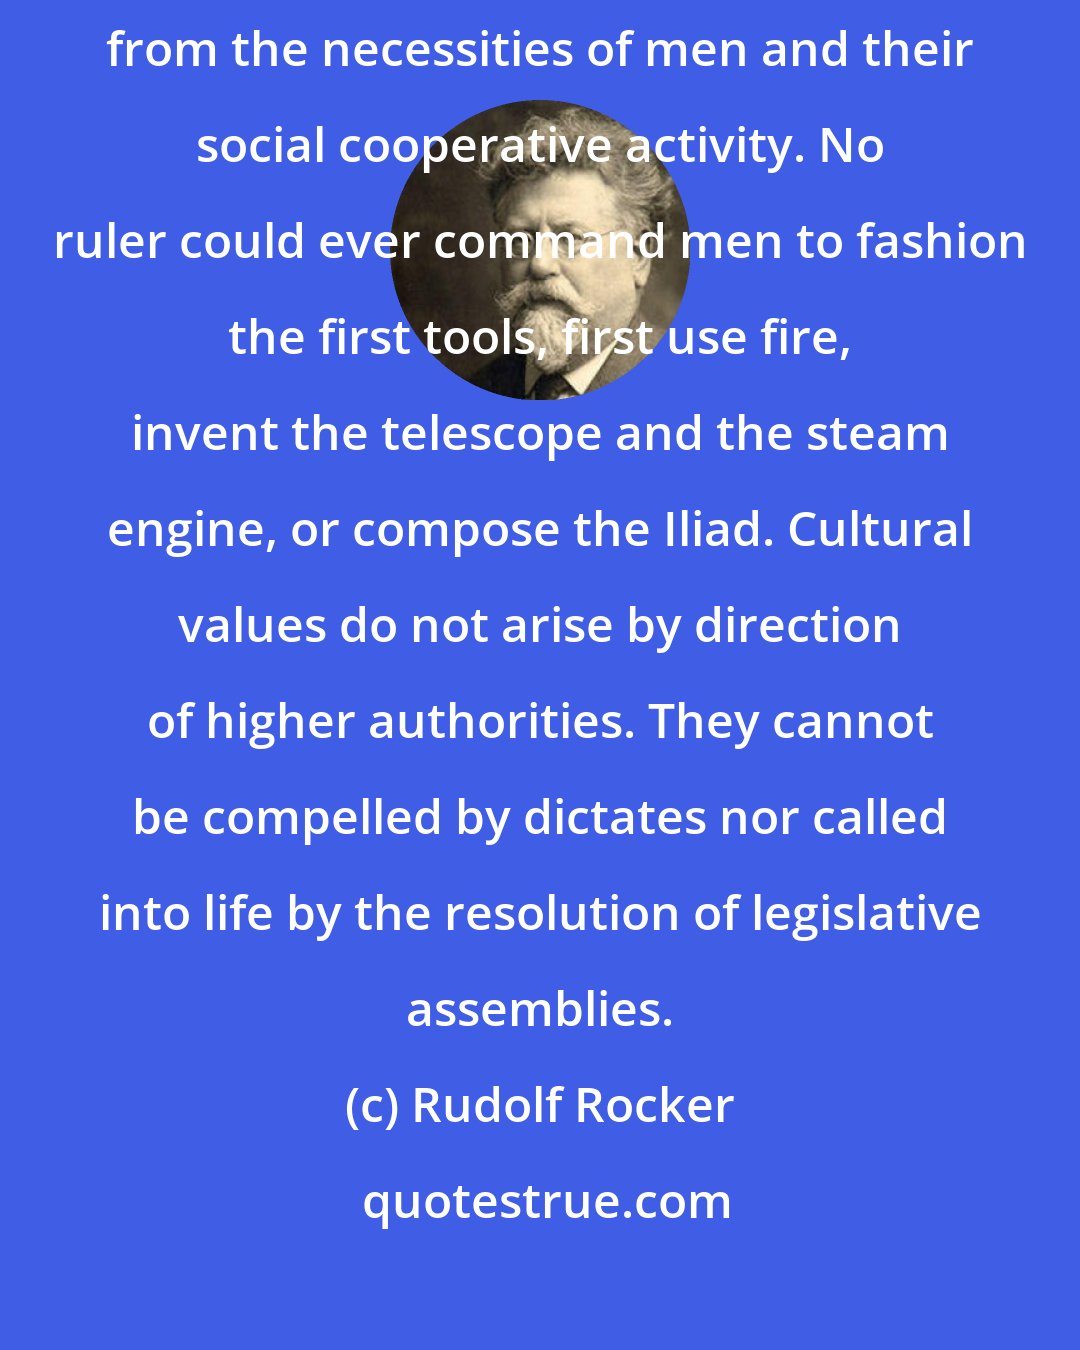 Rudolf Rocker: Culture is not created by command. It creates itself, arising spontaneously from the necessities of men and their social cooperative activity. No ruler could ever command men to fashion the first tools, first use fire, invent the telescope and the steam engine, or compose the Iliad. Cultural values do not arise by direction of higher authorities. They cannot be compelled by dictates nor called into life by the resolution of legislative assemblies.